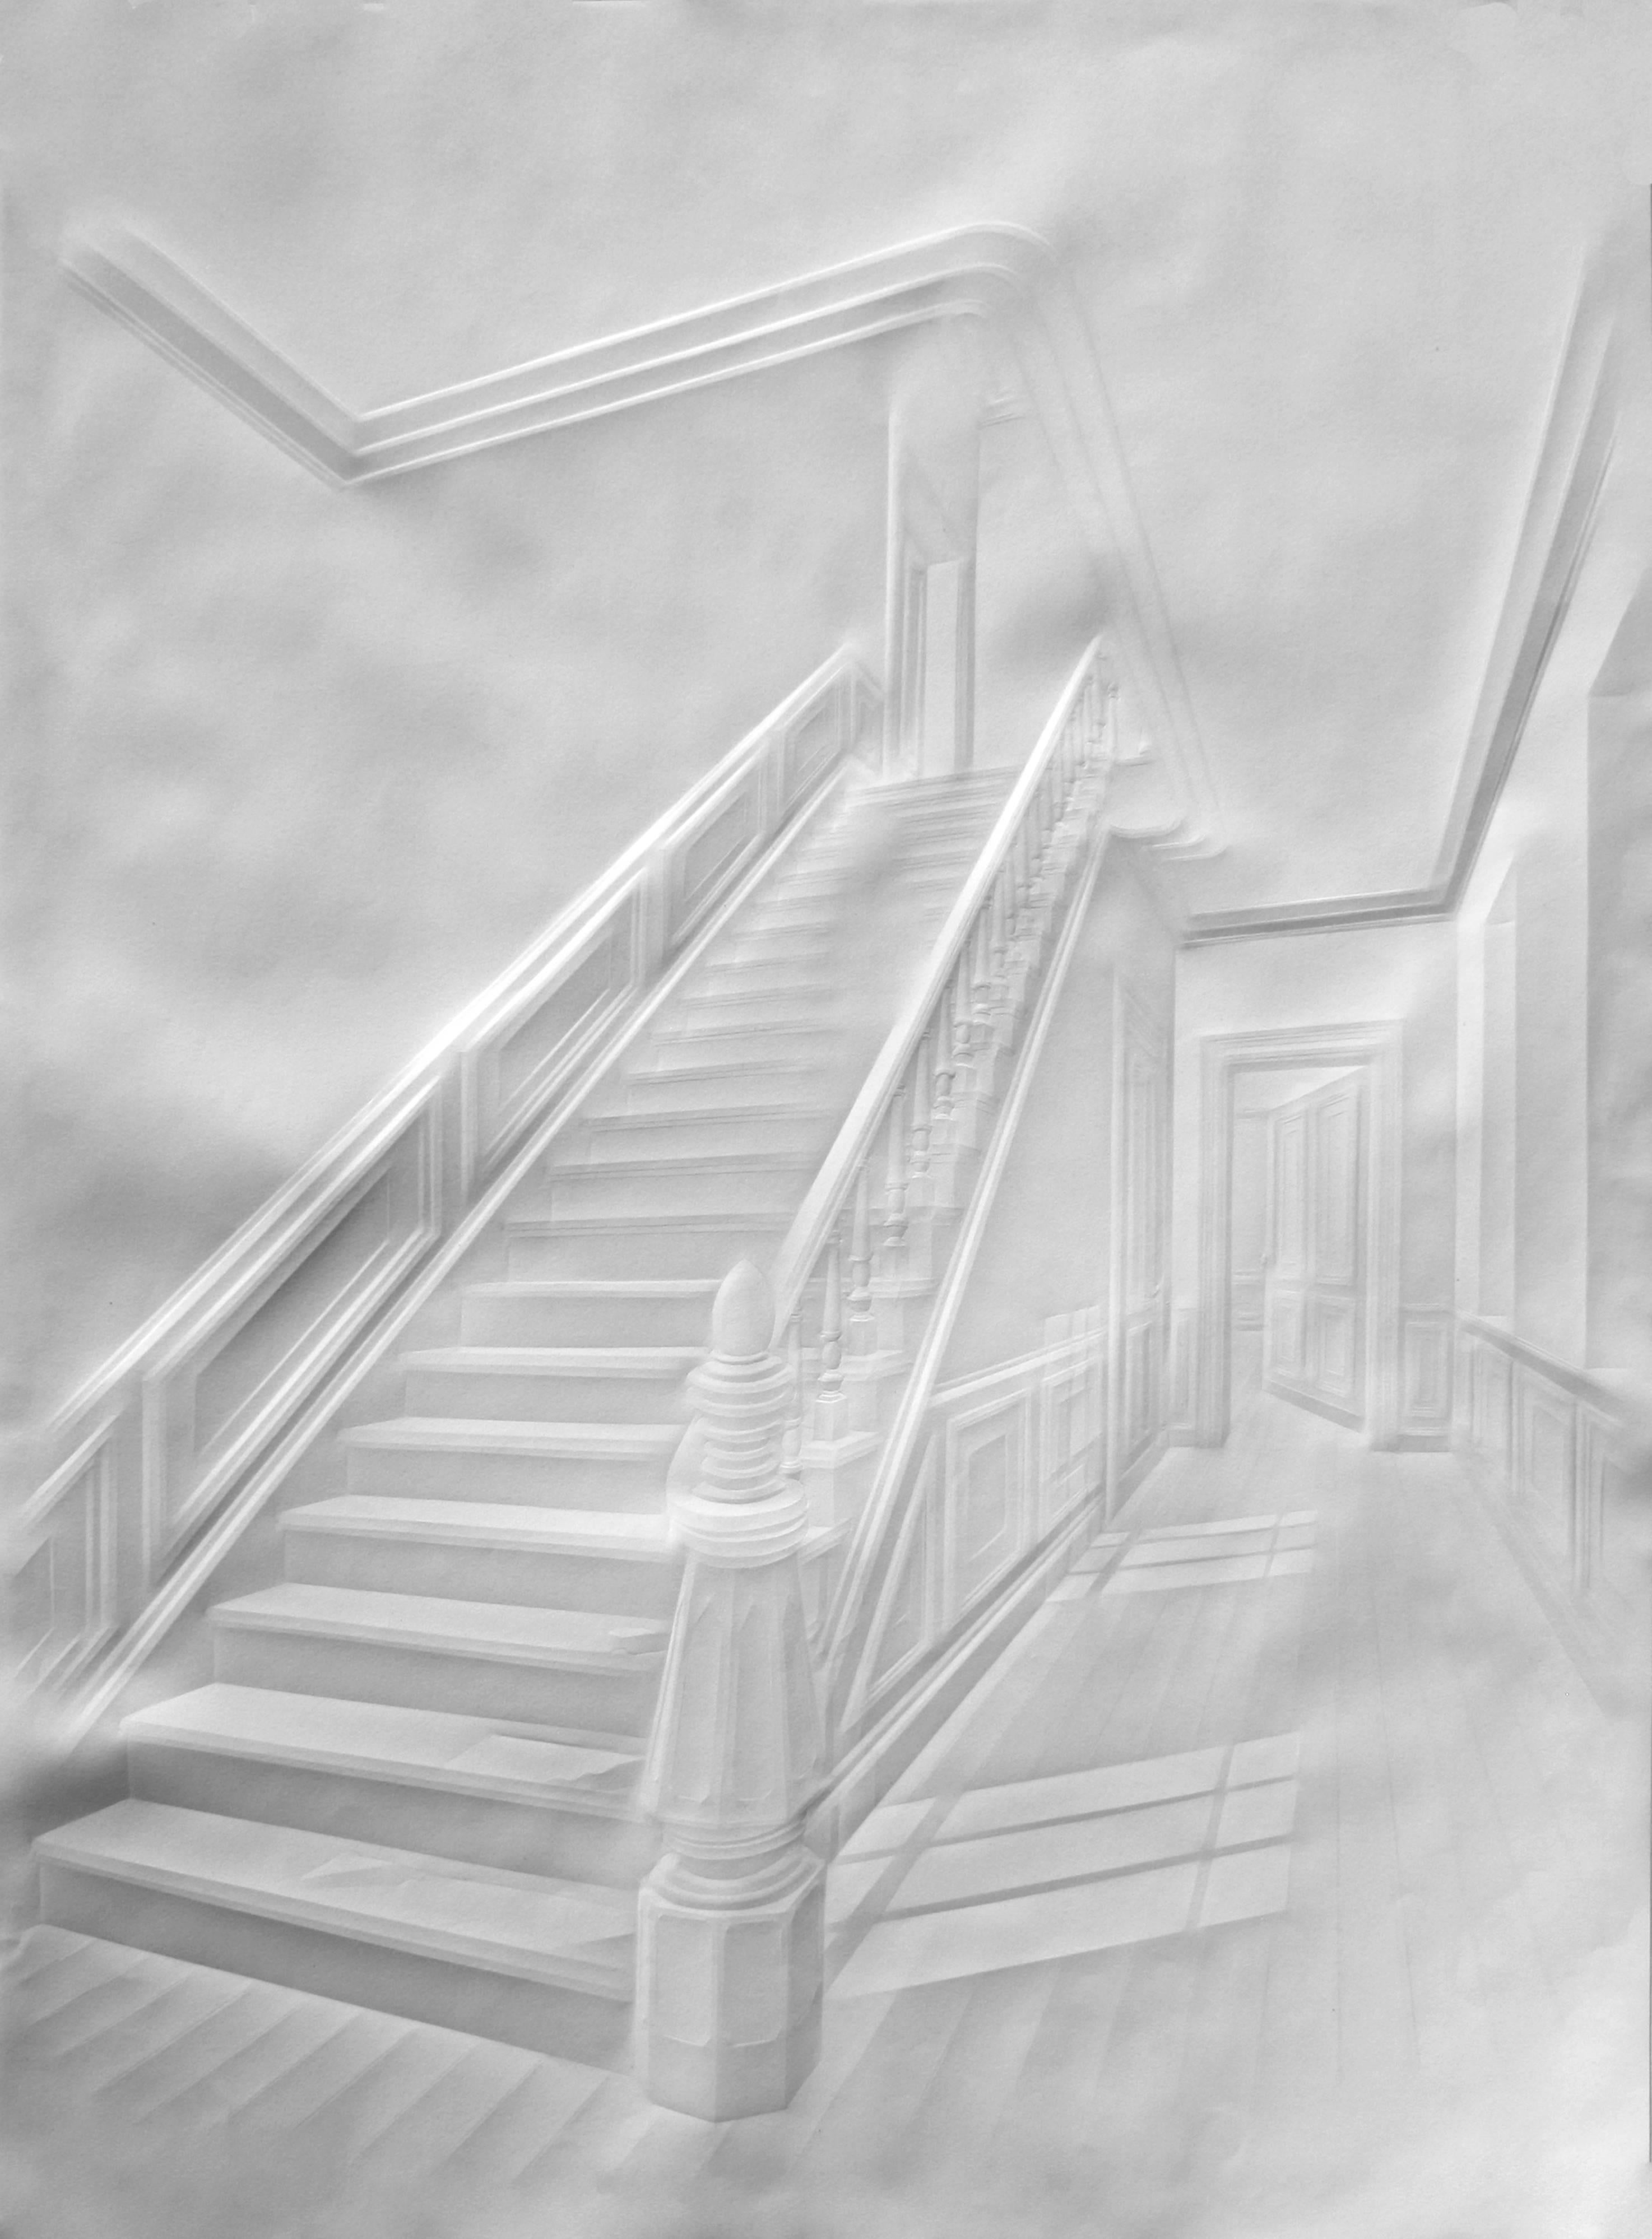 Untitled (Stairs with Figure) - Mixed Media Art by Simon Schubert